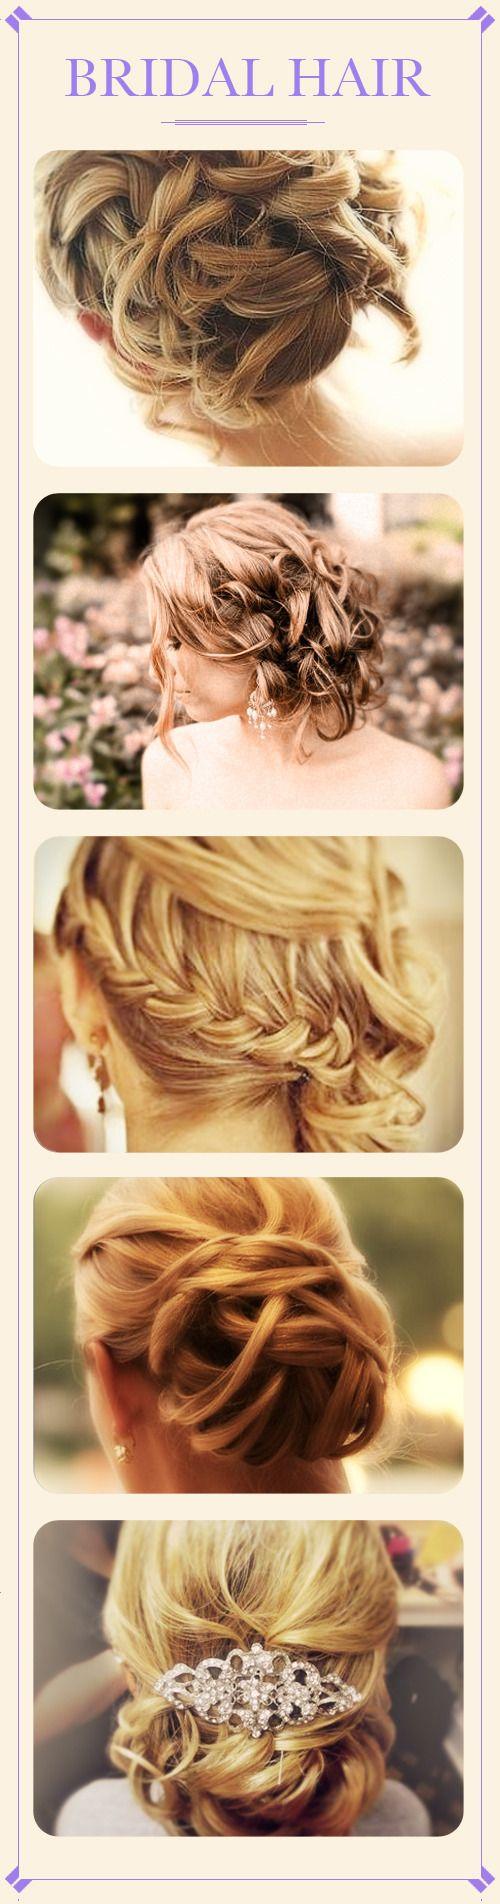 few different bridal hairstyles